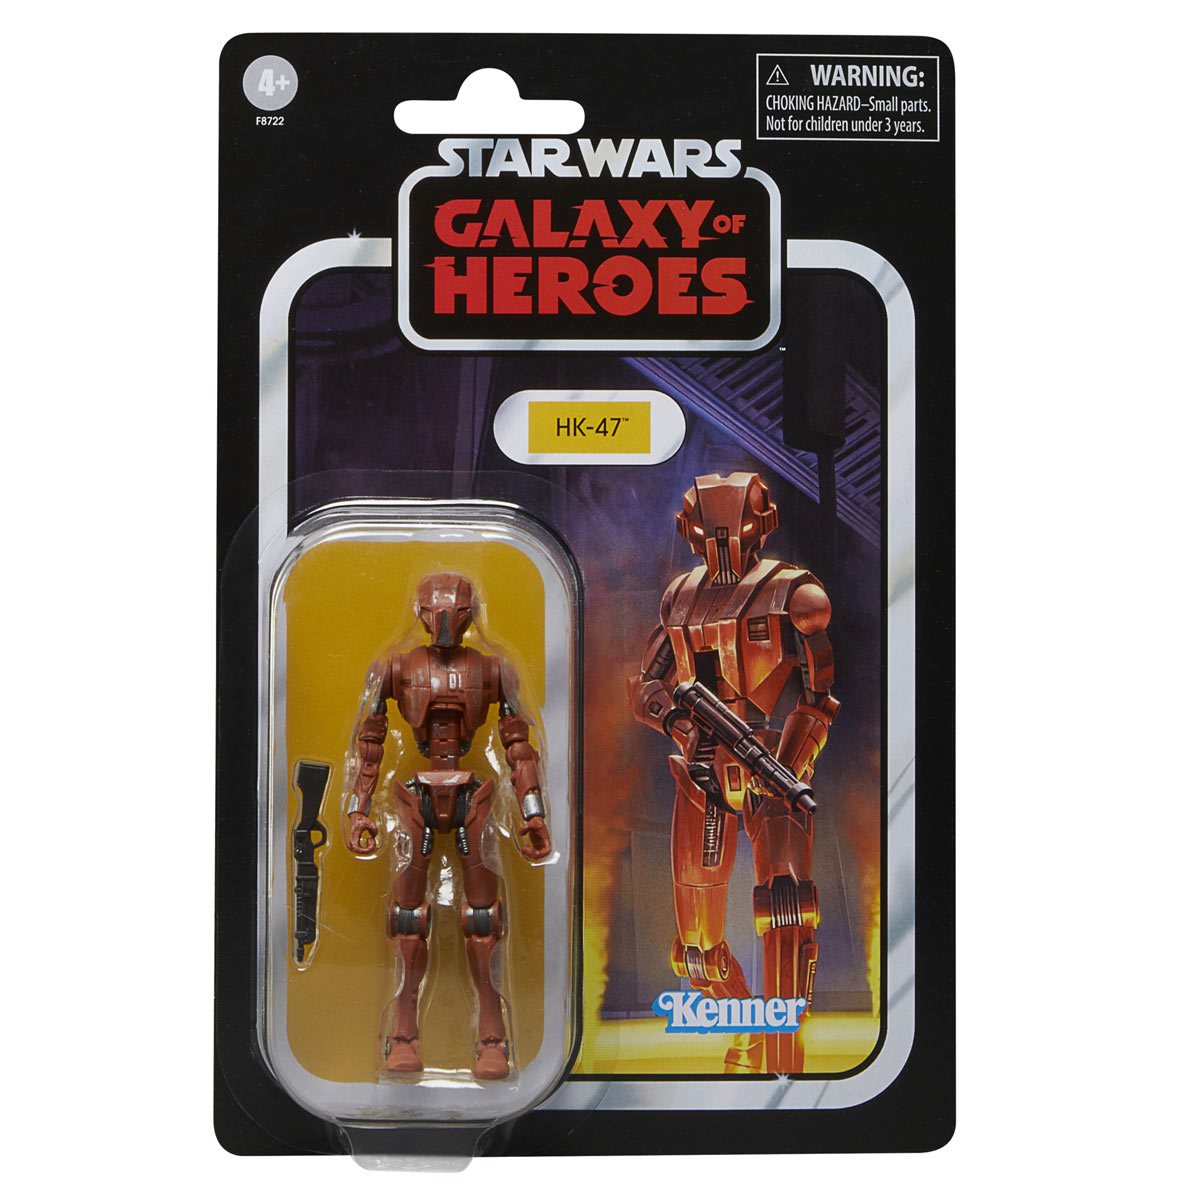 Star Wars The Vintage Collection Jedi Knight Revan and HK-47 3 3/4-Inch Action Figures HASF8722 5010996181657